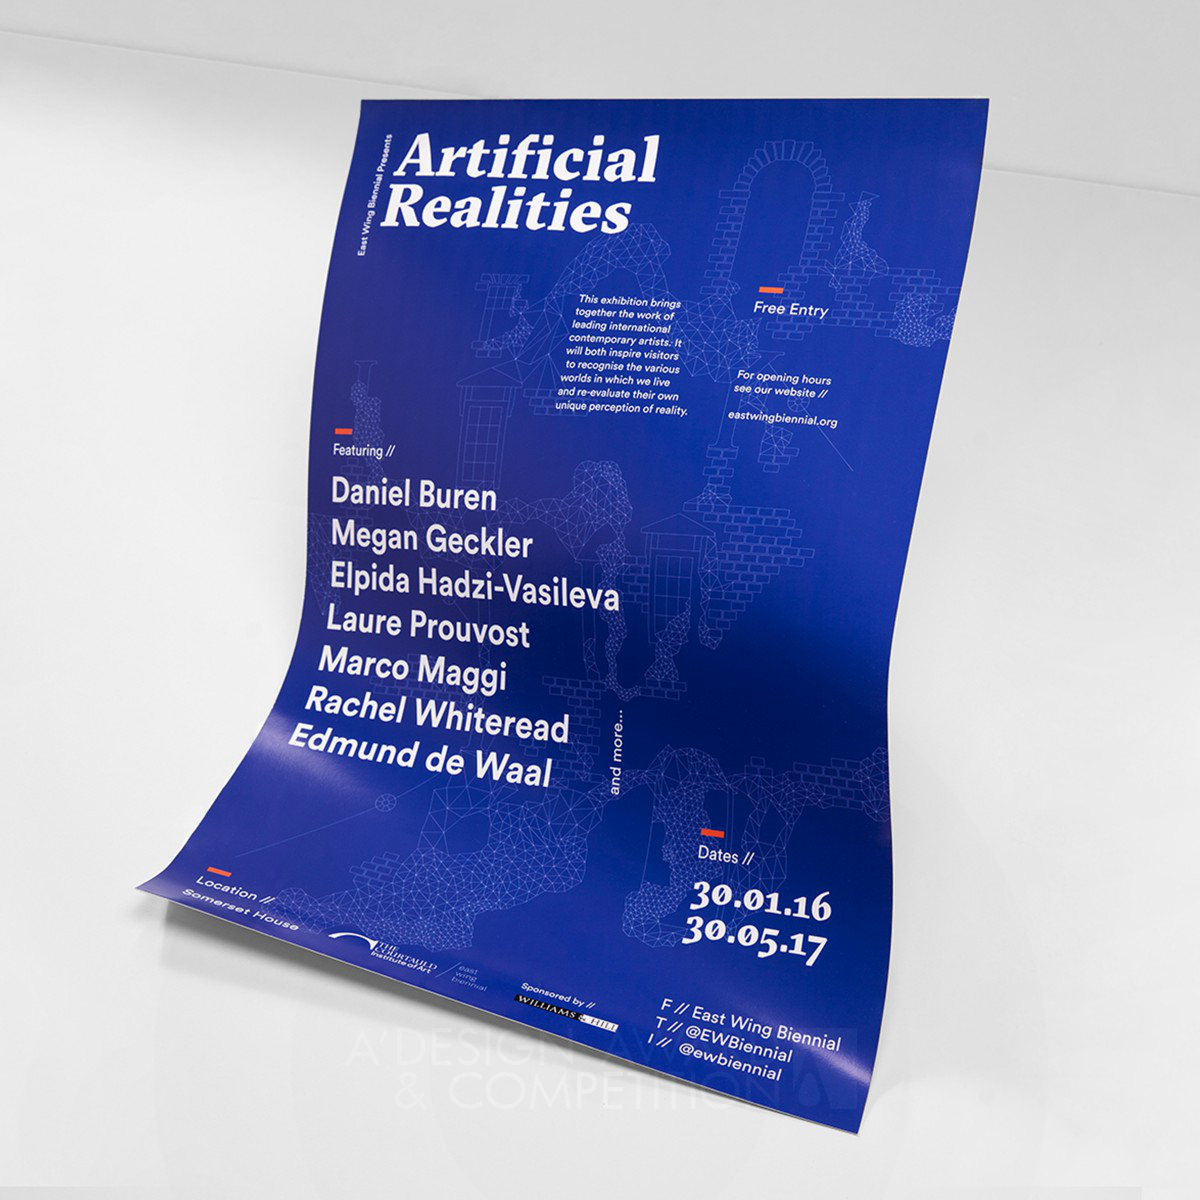 Artificial Realities  Exhibition identity by Alex Howell